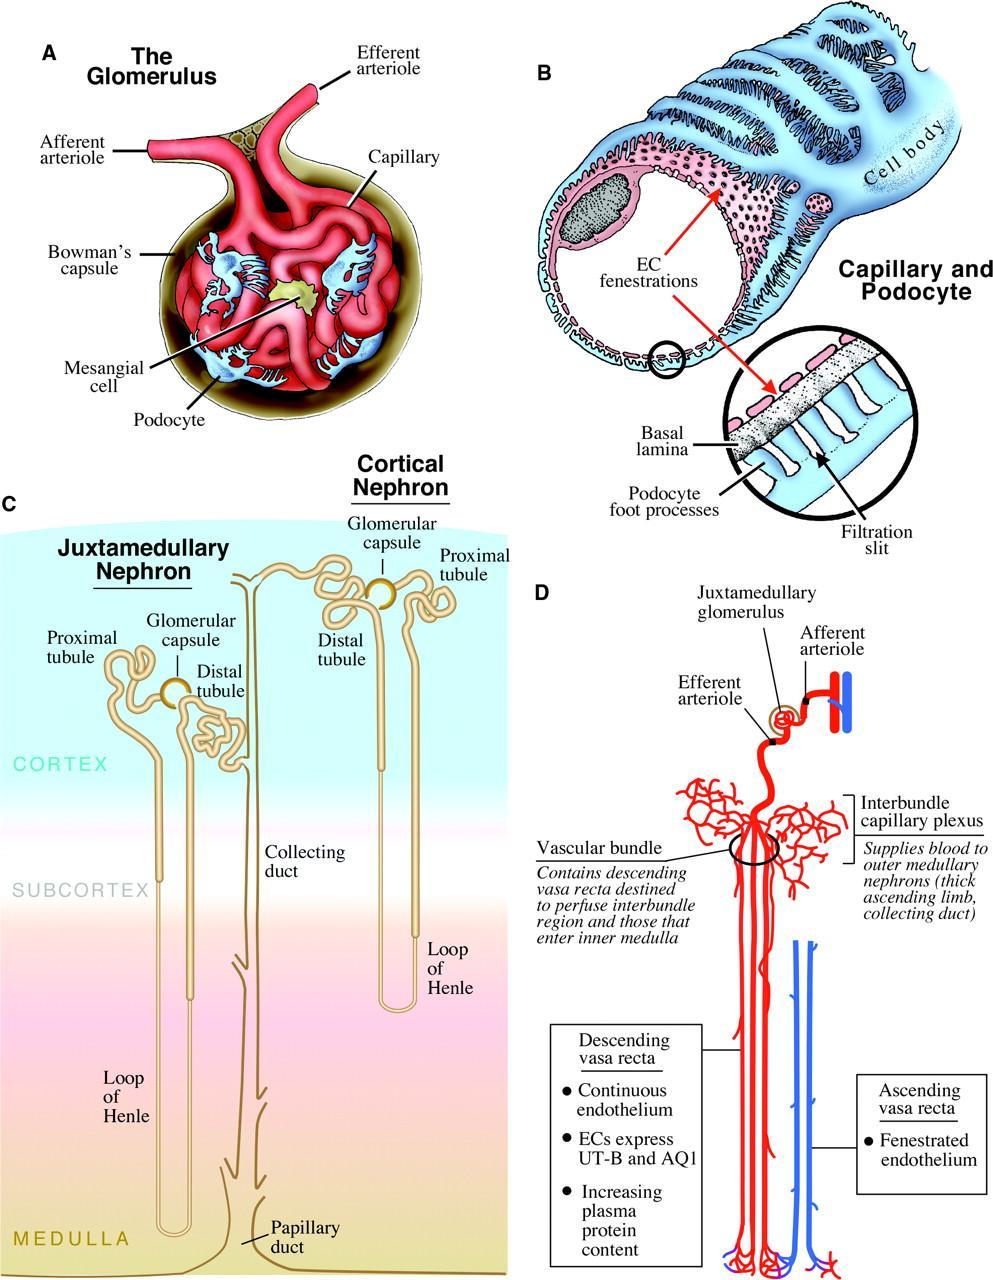 Endothelial Diversity in the Human Body The endothelium should be viewed for what it is: an organ